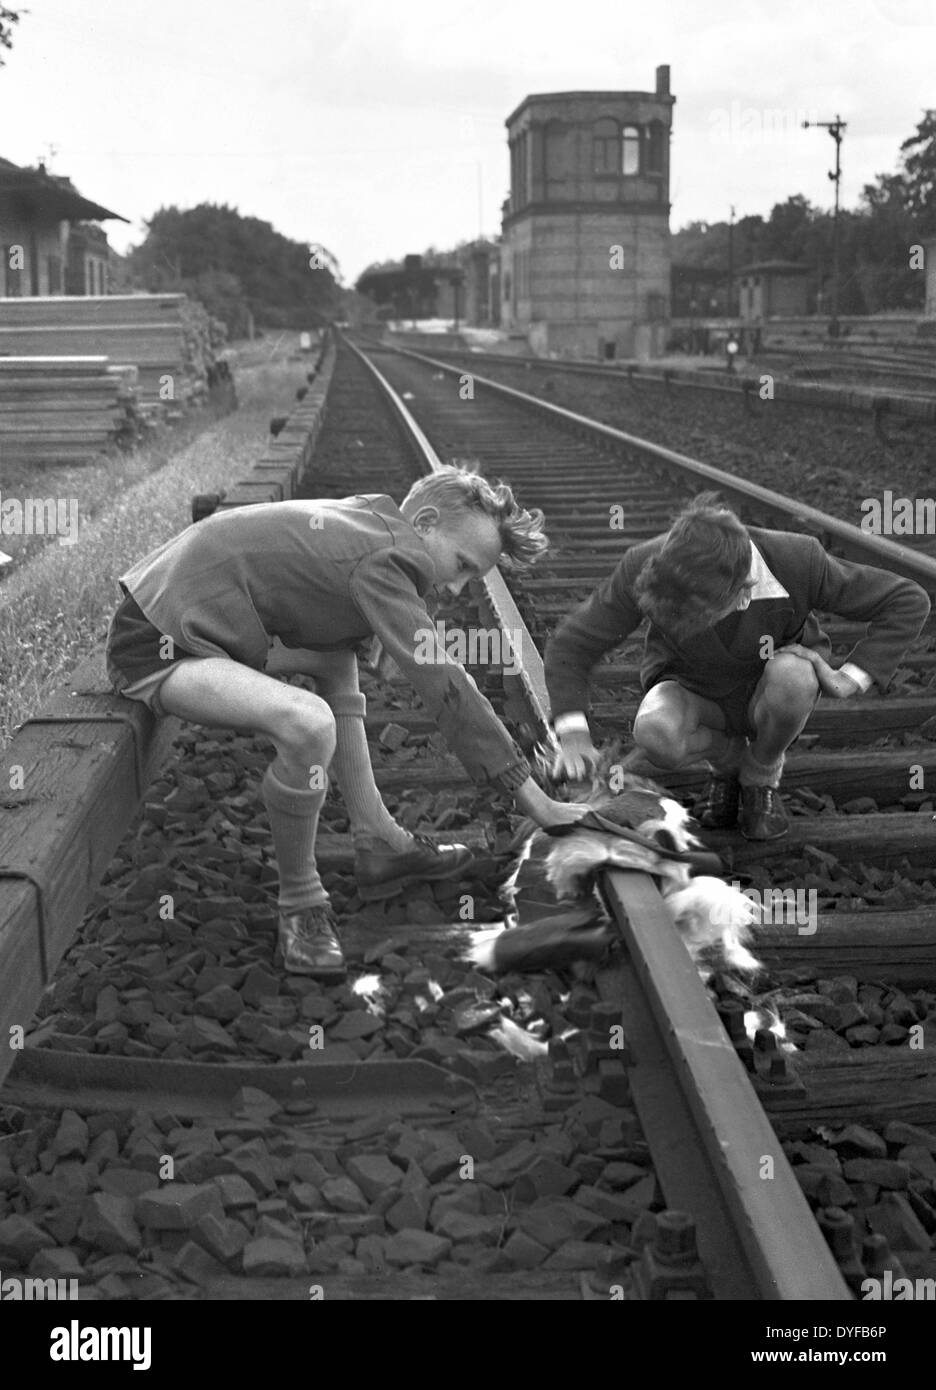 After the ballot vote for the continuation of the strike of the East German State Railway, children play at the empty rails of the suburban train in West Berlin, photograph taken in June 1949. The whole railway operations and infrastructure of Berlin were subordinated to the East German State Railway (Deutsche Reichsbahn, DR) of the Soviet zone of occupation until 1949. On 21 May 1949, the Unabhängige Gewerkschaftsopposition UGO in the West sectors called upon to strike. Around 13.000 Reichsbahner (workers of the East German State Railway) living in West Berlin stopped work and fought for a pa Stock Photo